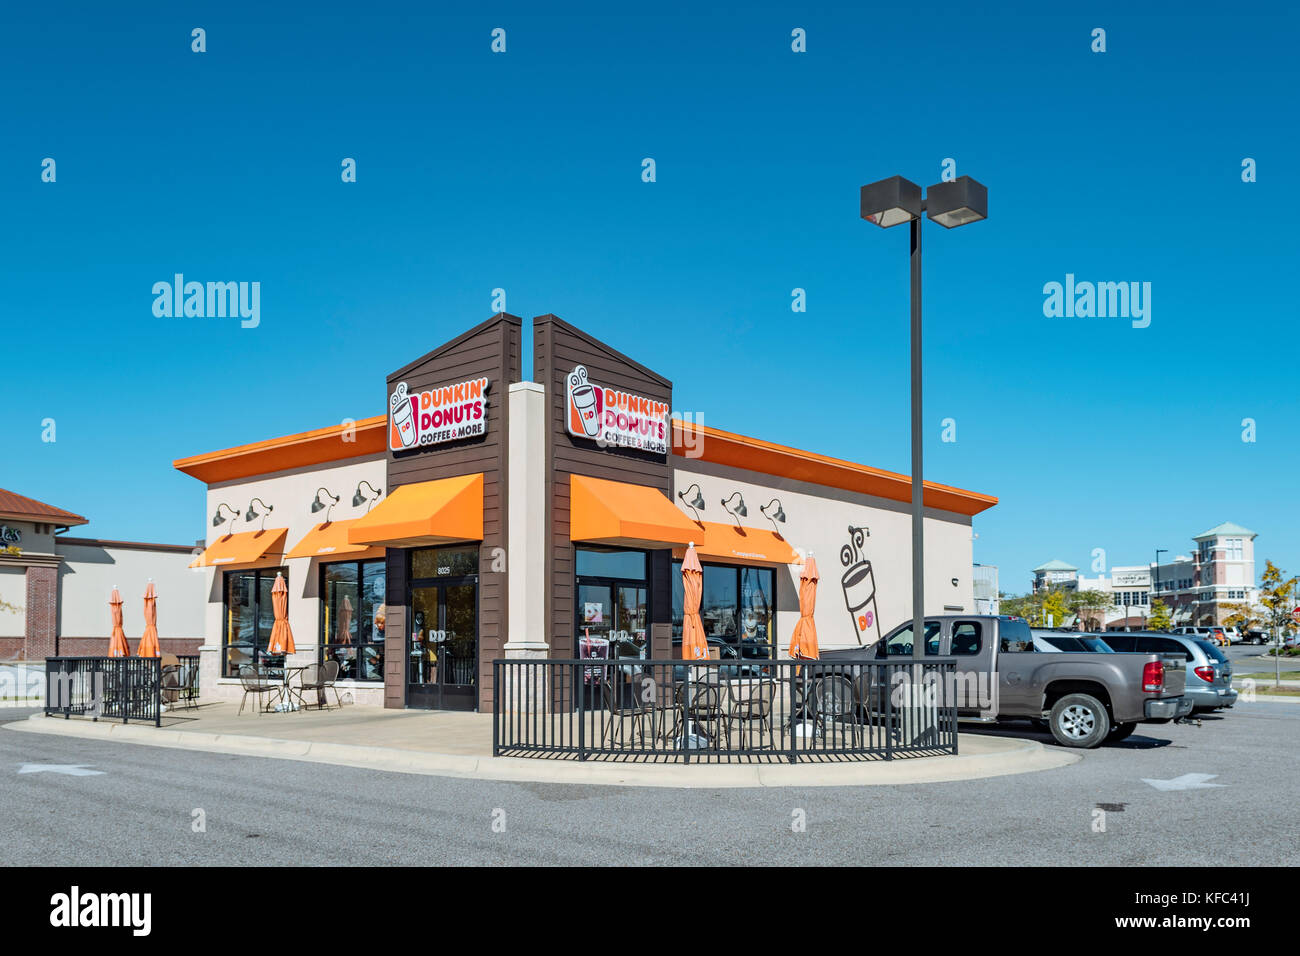 Exterior entrance to a coffee shop, Dunkin Donuts store, Montgomery Alabama, USA. Stock Photo